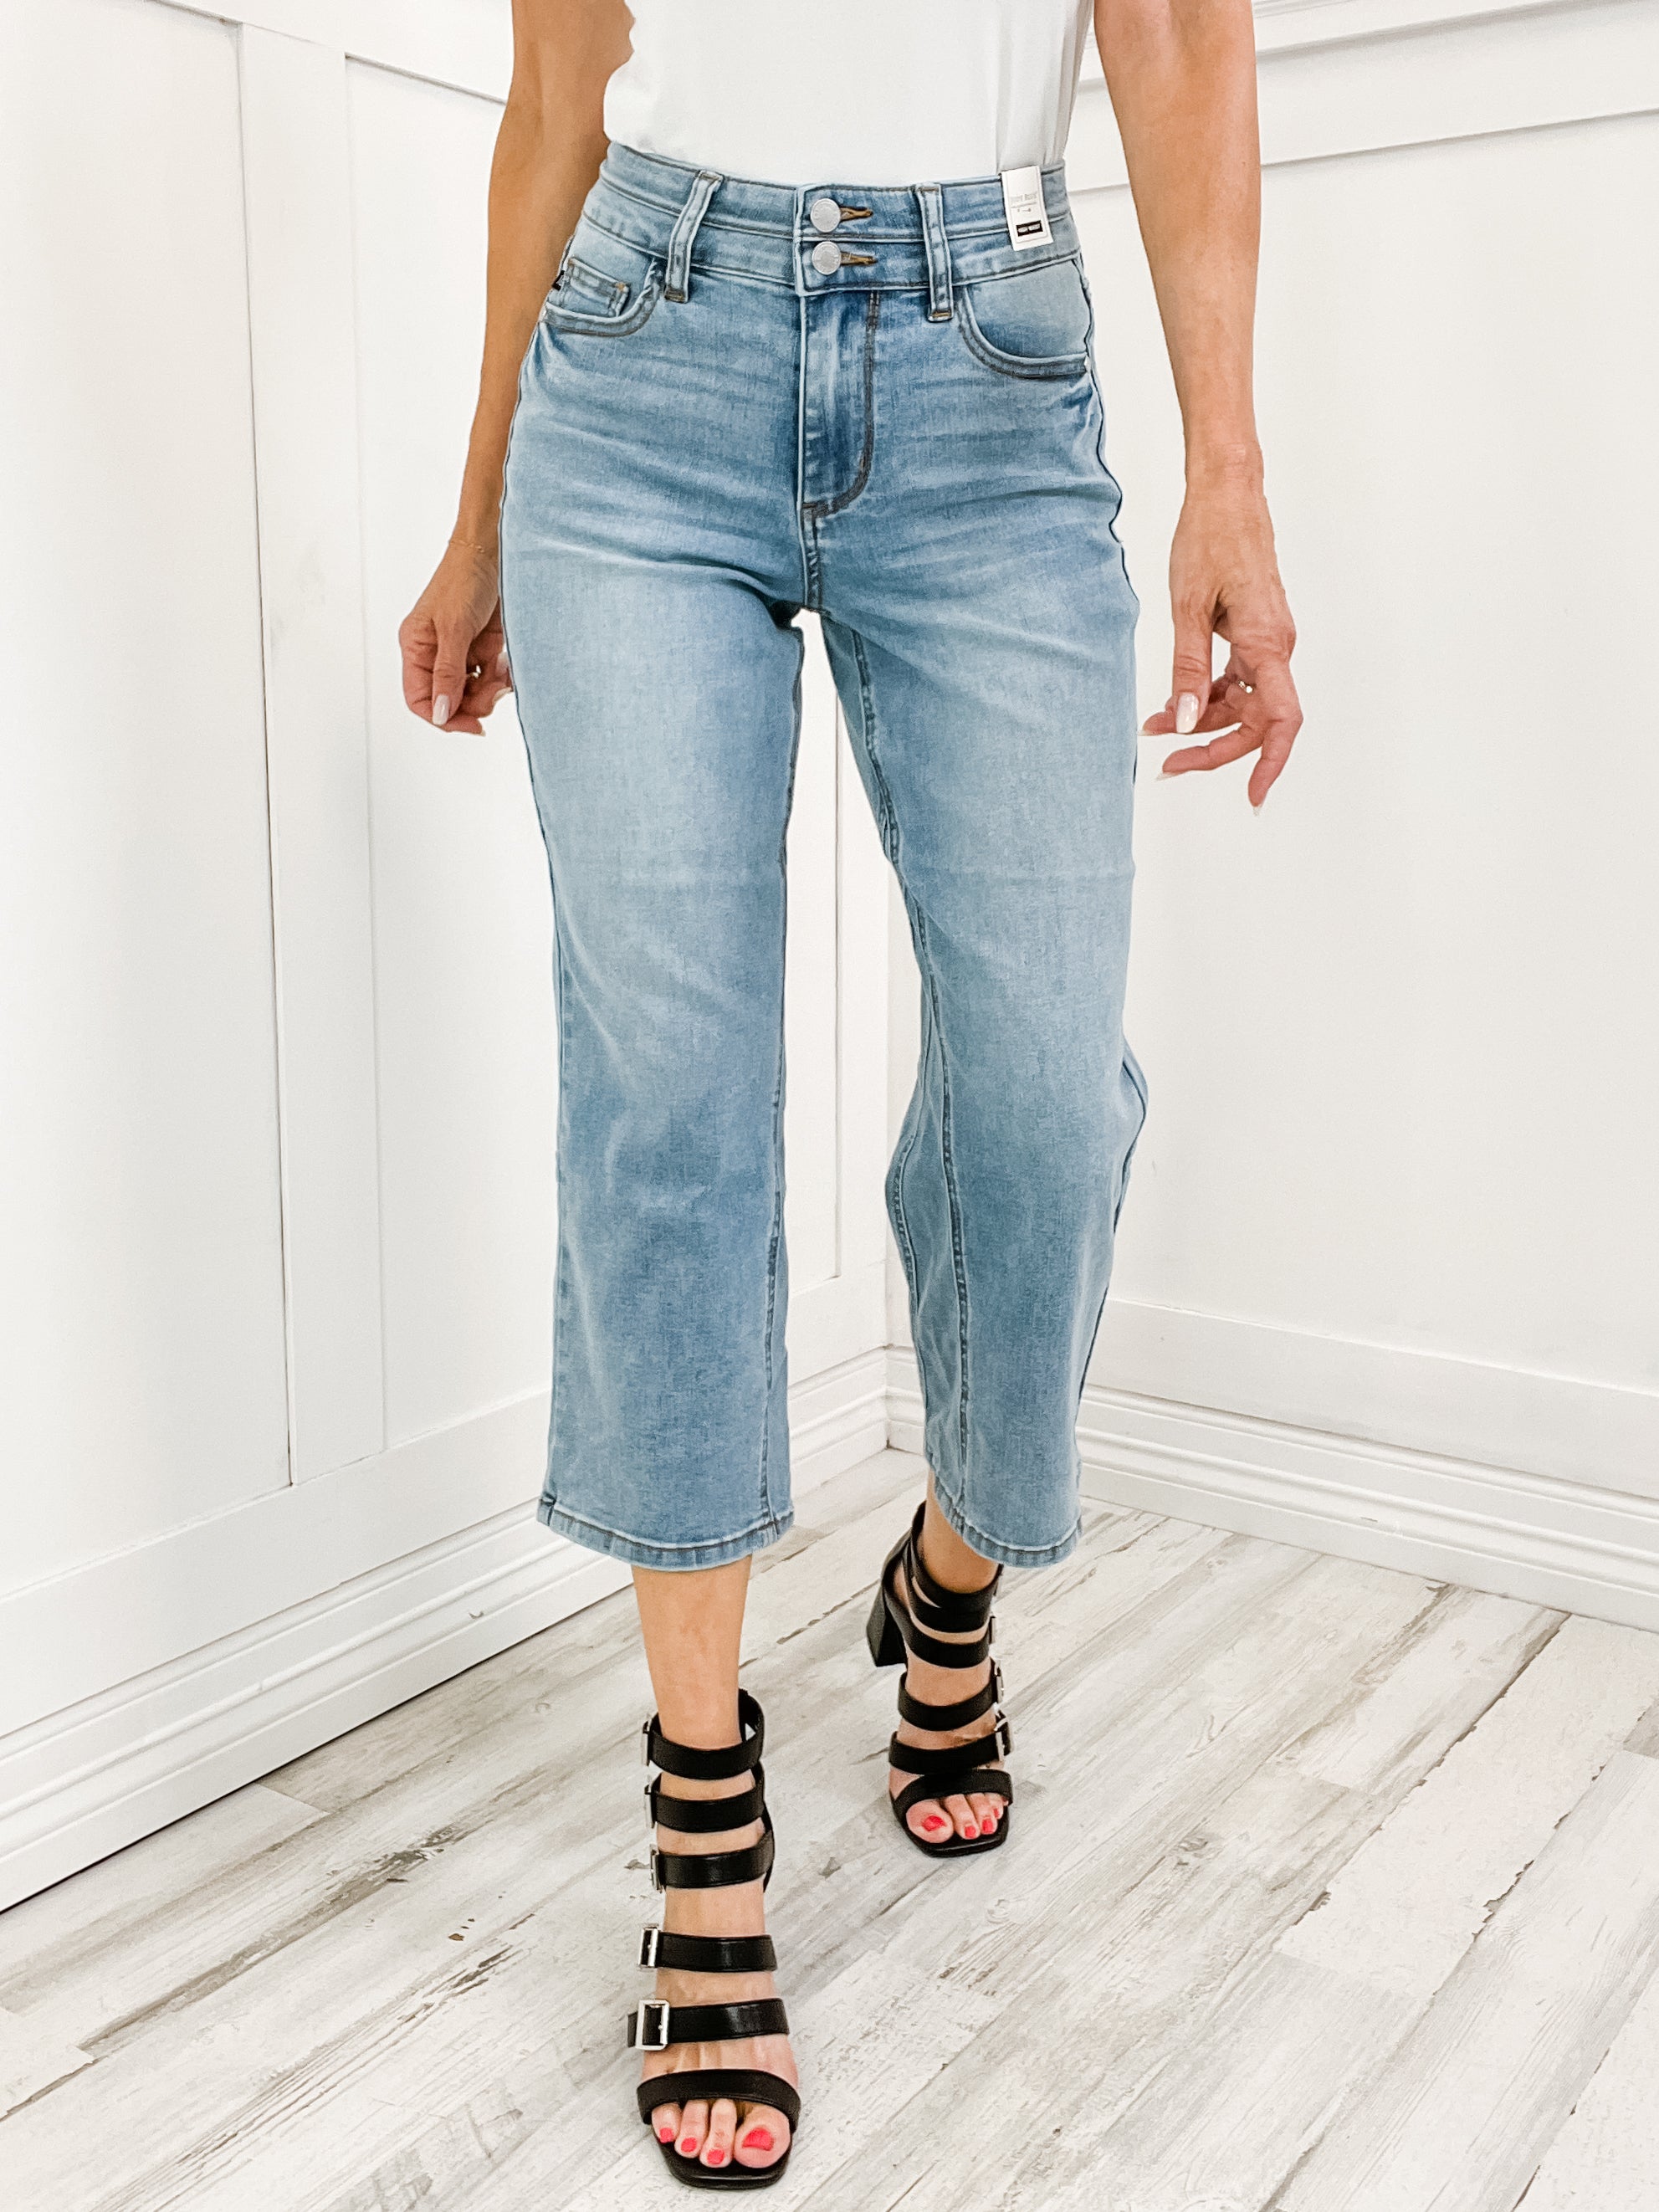 Top Selling Denim Collection From Emma Lou's Boutique